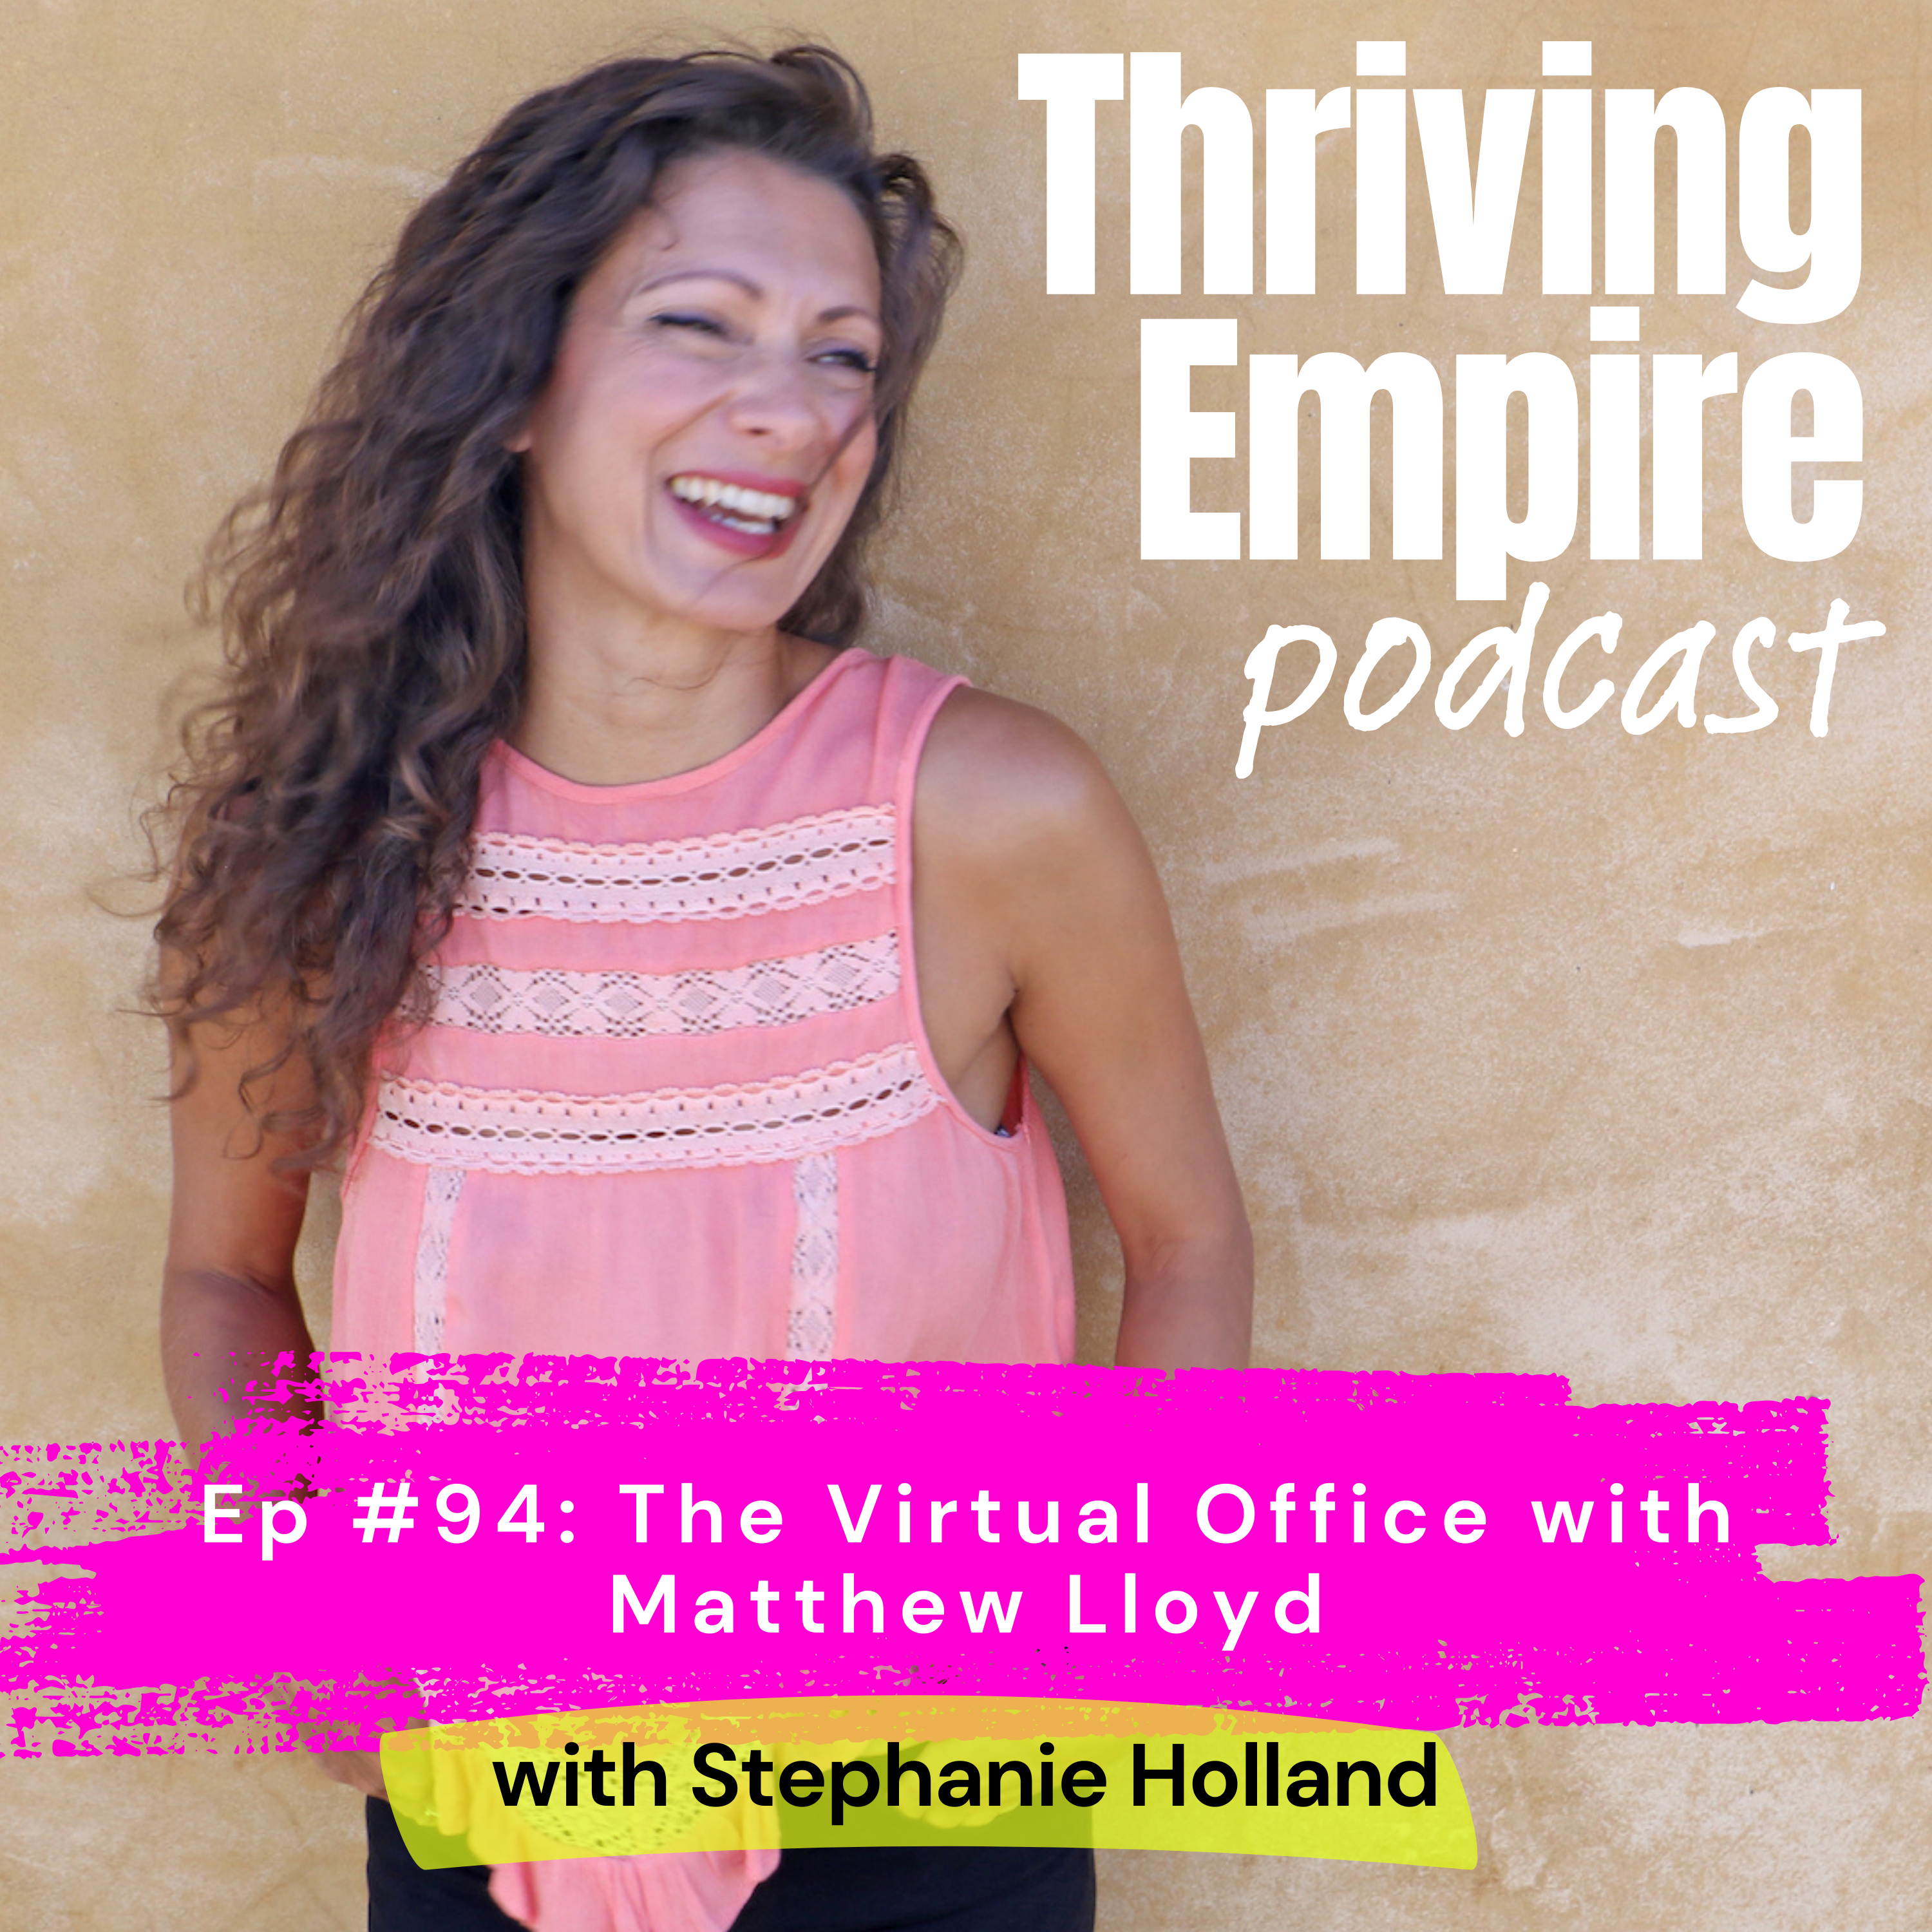 Ep #94: The Virtual Office with Matthew Lloyd